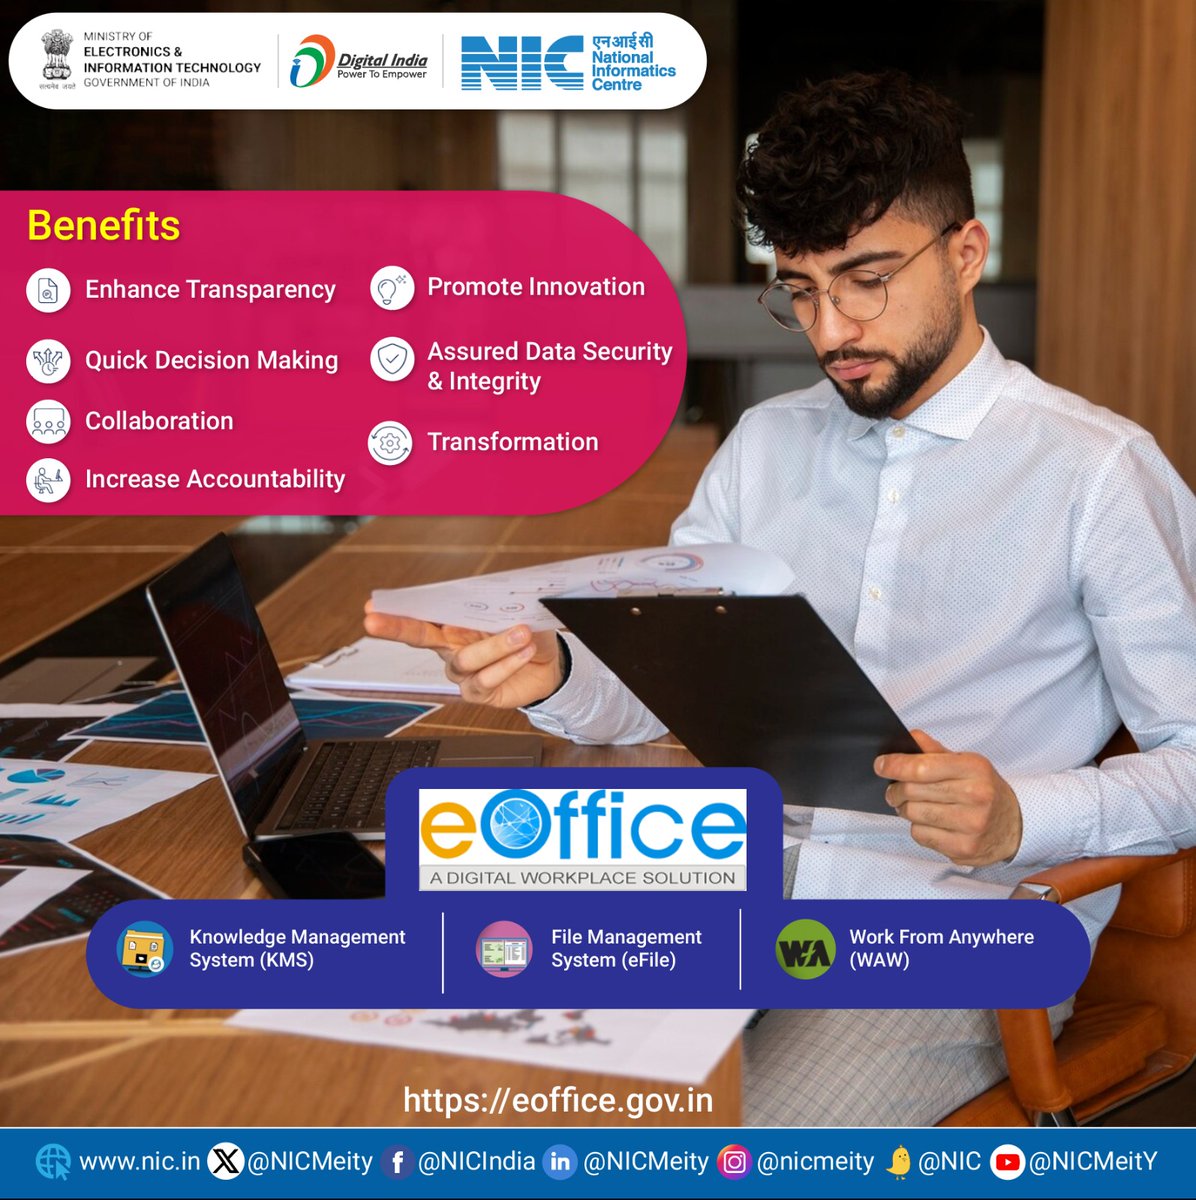 #eOffice product suite by @NICMeity facilitates simplified, responsive, effective, transparent, and #paperless working across Government offices. The product brings together the independent functions and systems under a single framework.
➡️eoffice.gov.in
#NICMeitY